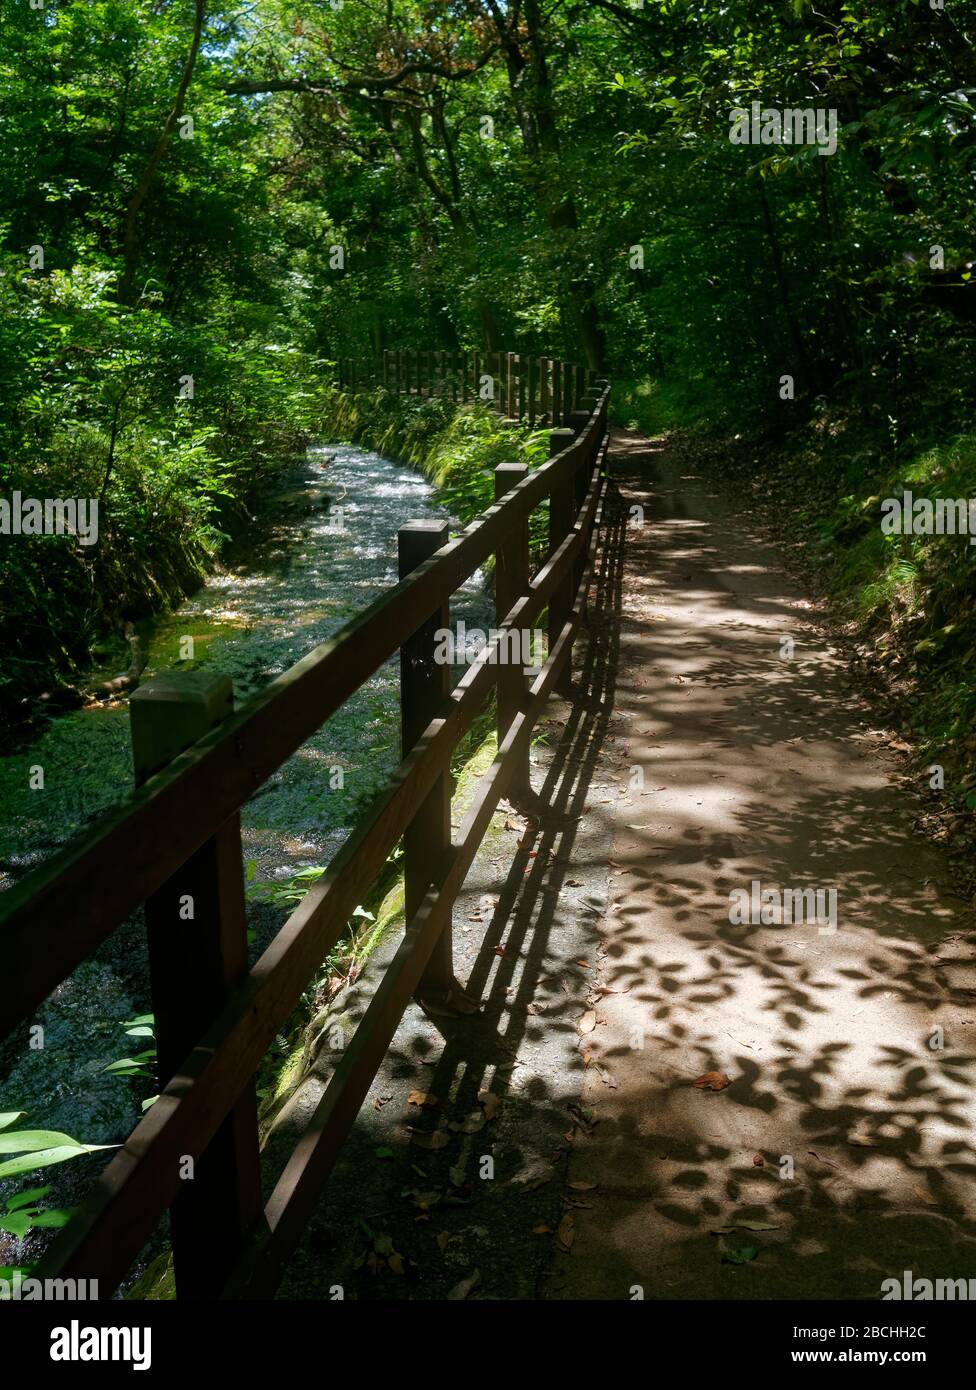 Beautiful long hiking footpath with wooden fence next to the Tajima river in Ito, Izu, Japan. The sun shining through the leaves, casting shadows. Stock Photo